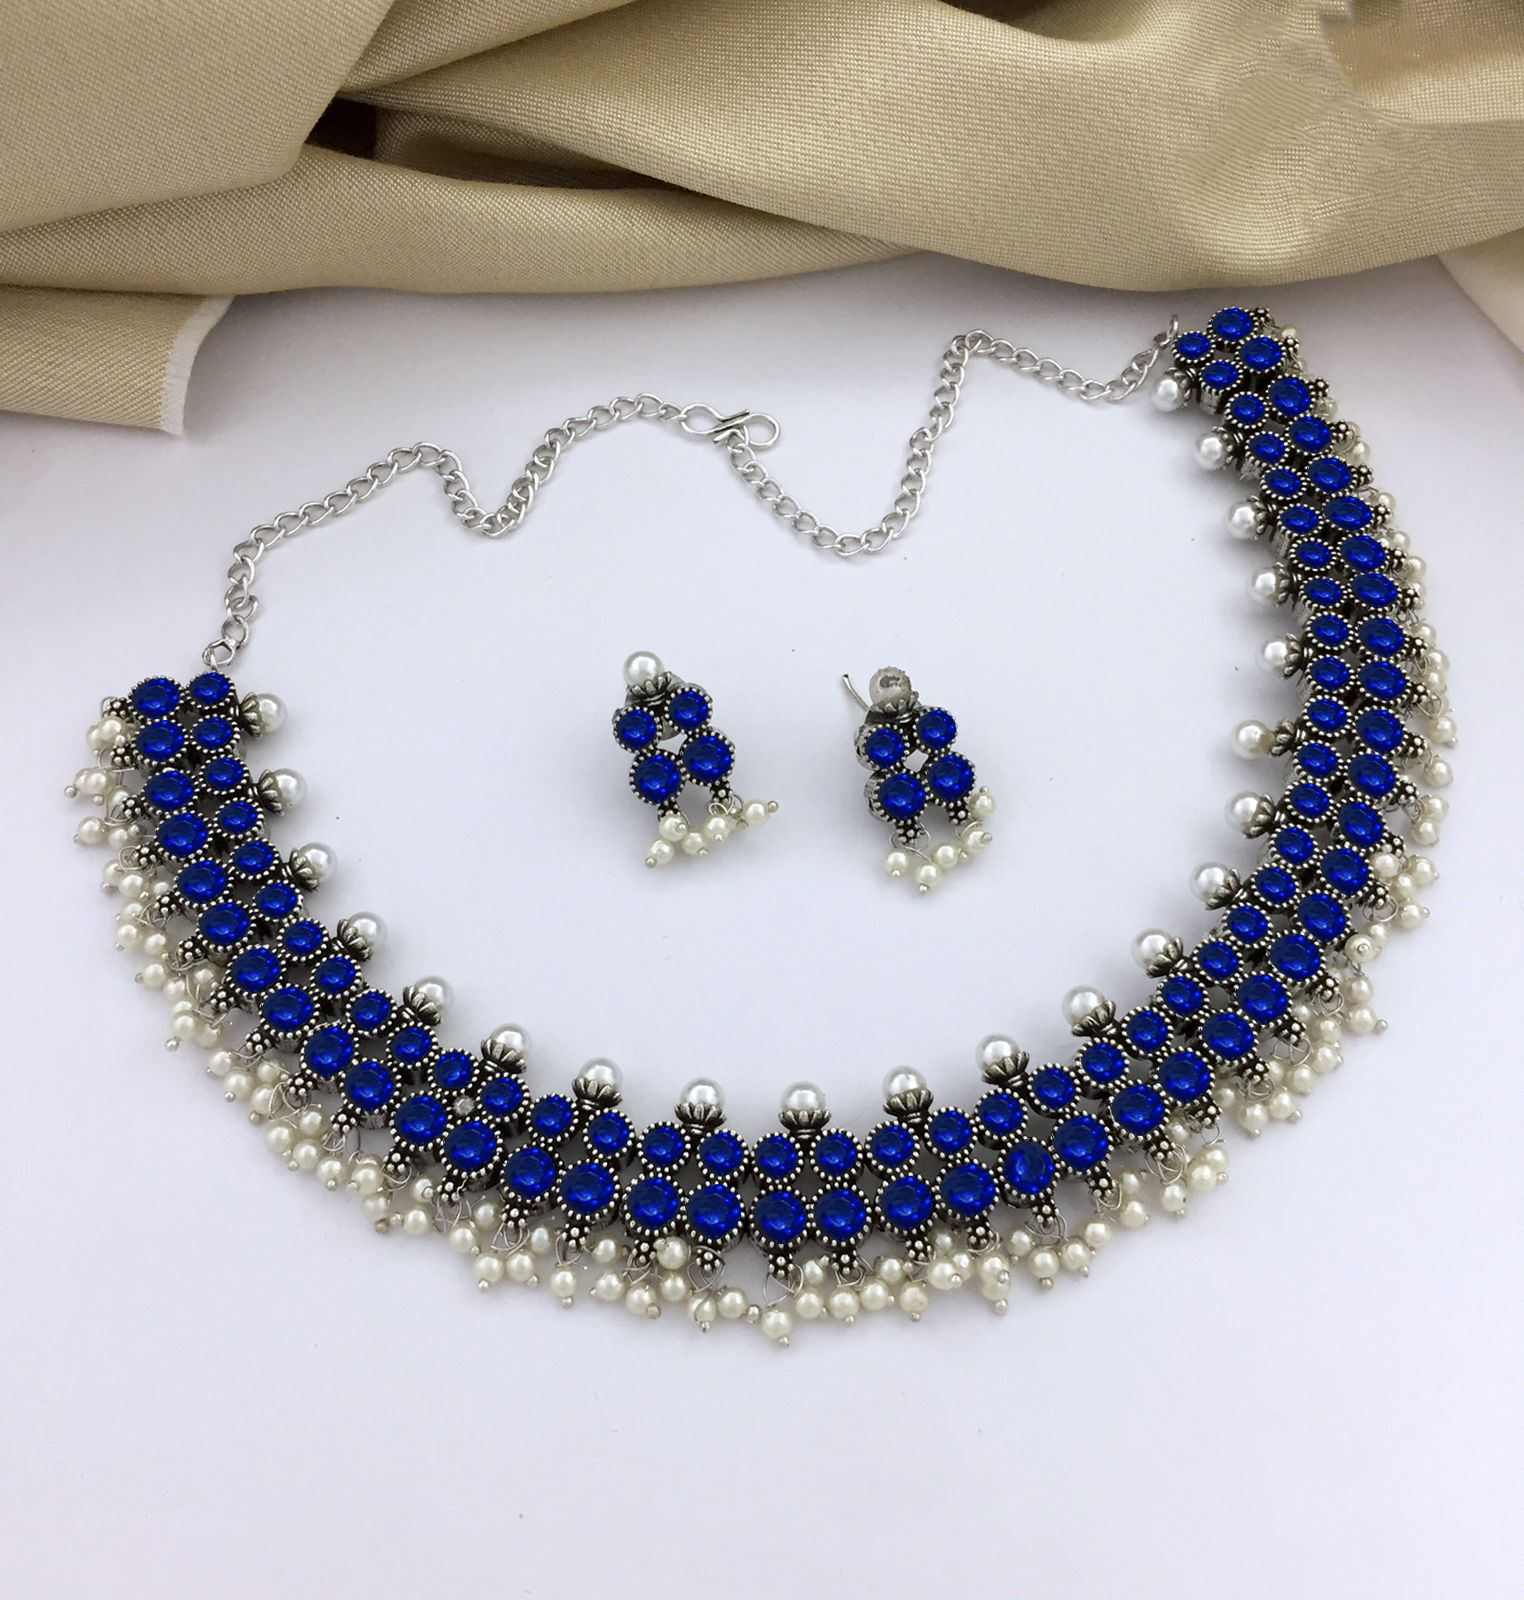 Two Layered Blue Oxidized Choker And Earrings Set With Pearls